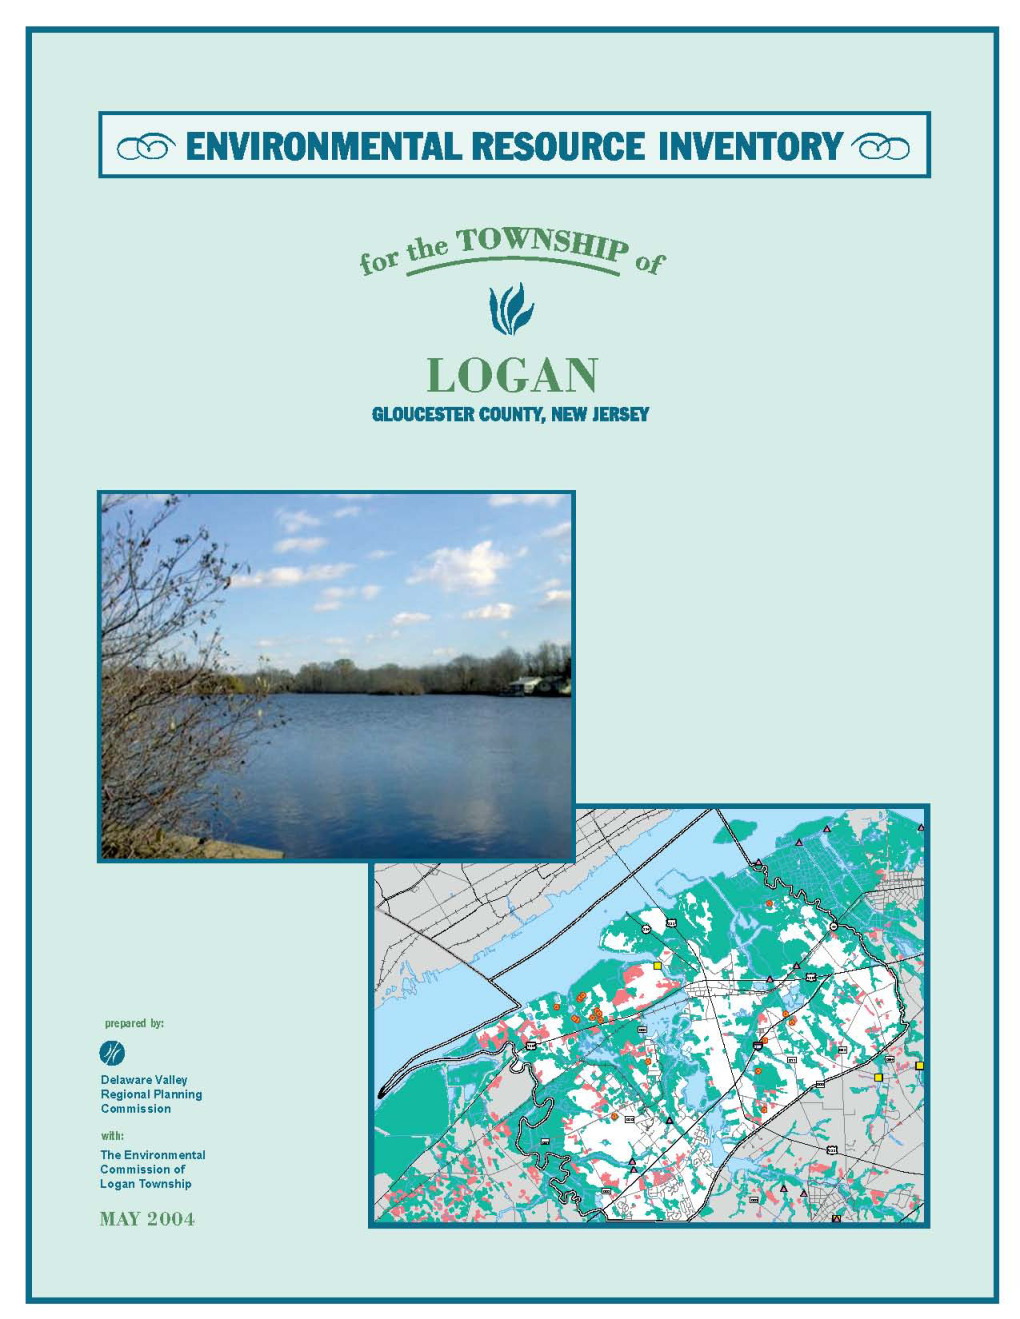 Environmental Resource Inventory for Logan Towhship, Gloucester County, New Jersey